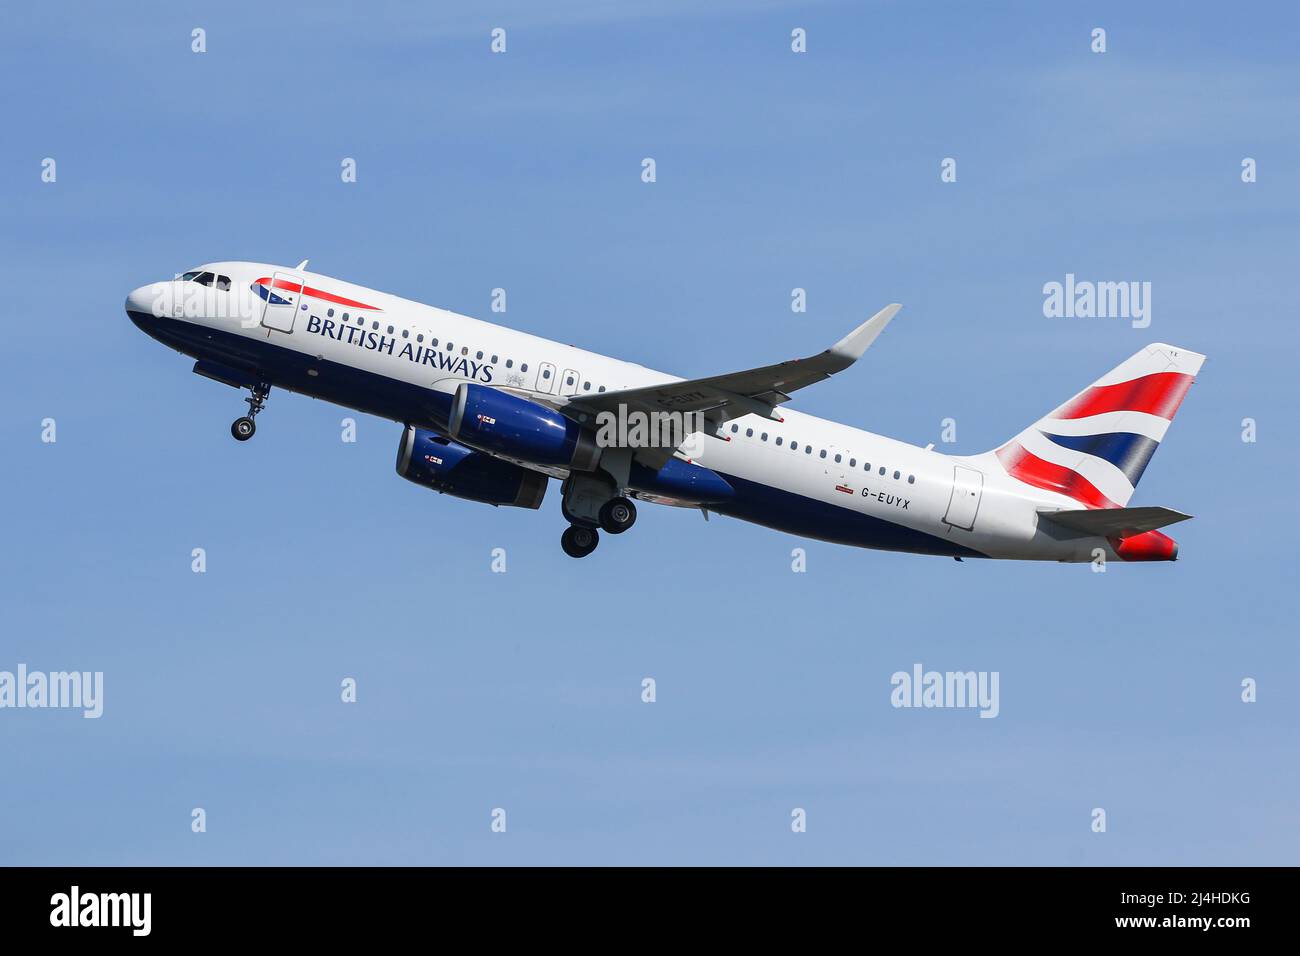 An Airbus A320 operated by British Airways departs from London Heathrow Airport Stock Photo